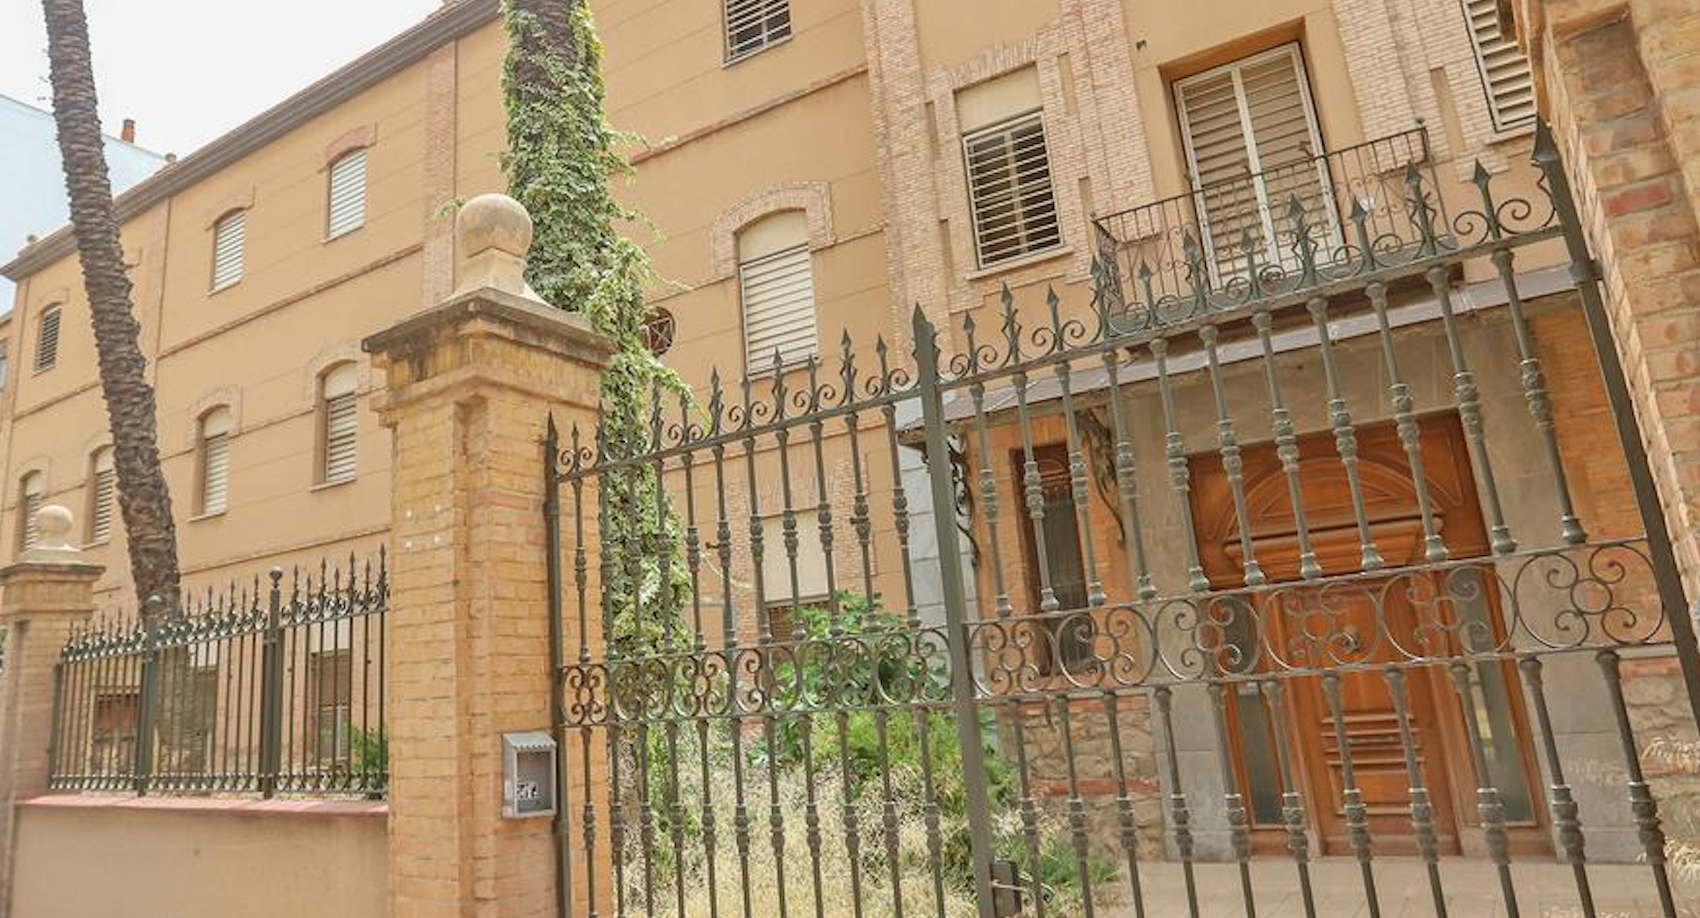 The Generalitat acquires the old asylum in Orihuela for €4M